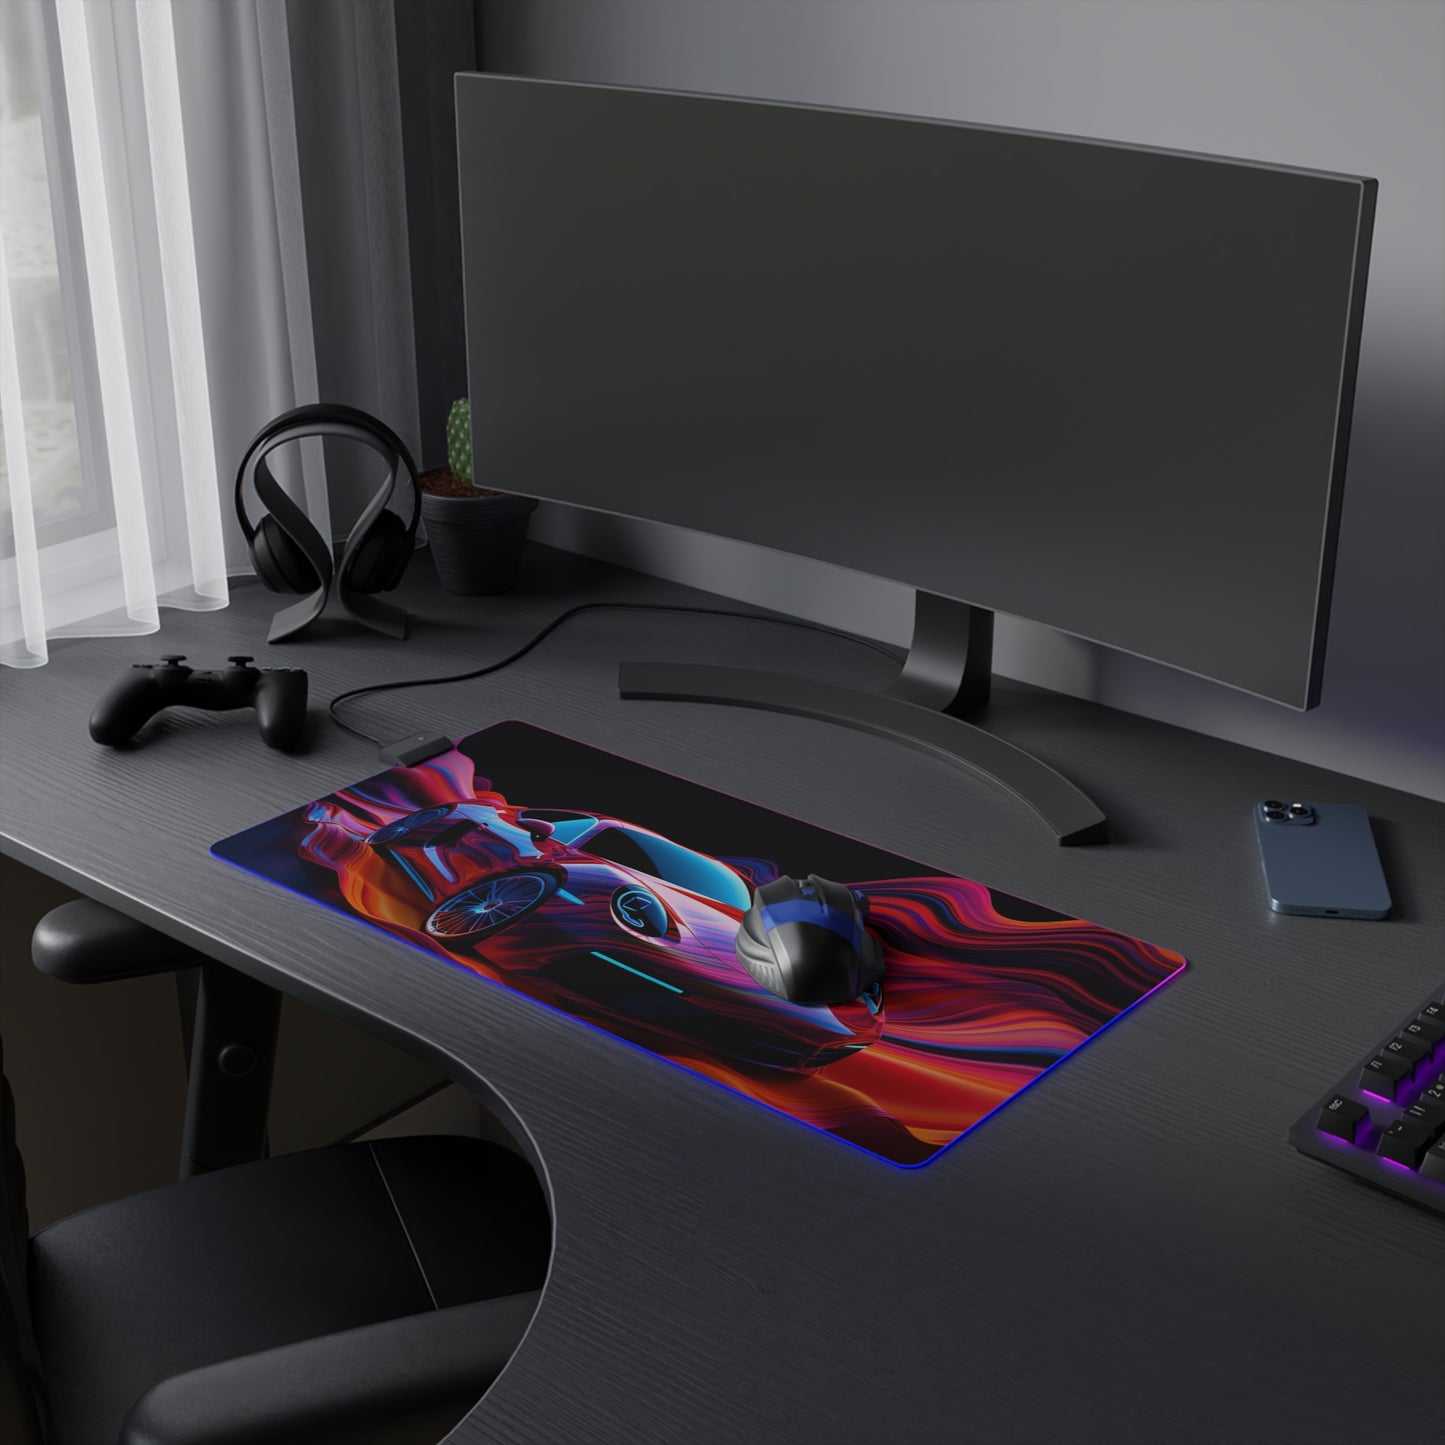 LED Gaming Mouse Pad Porsche Water Fusion 4